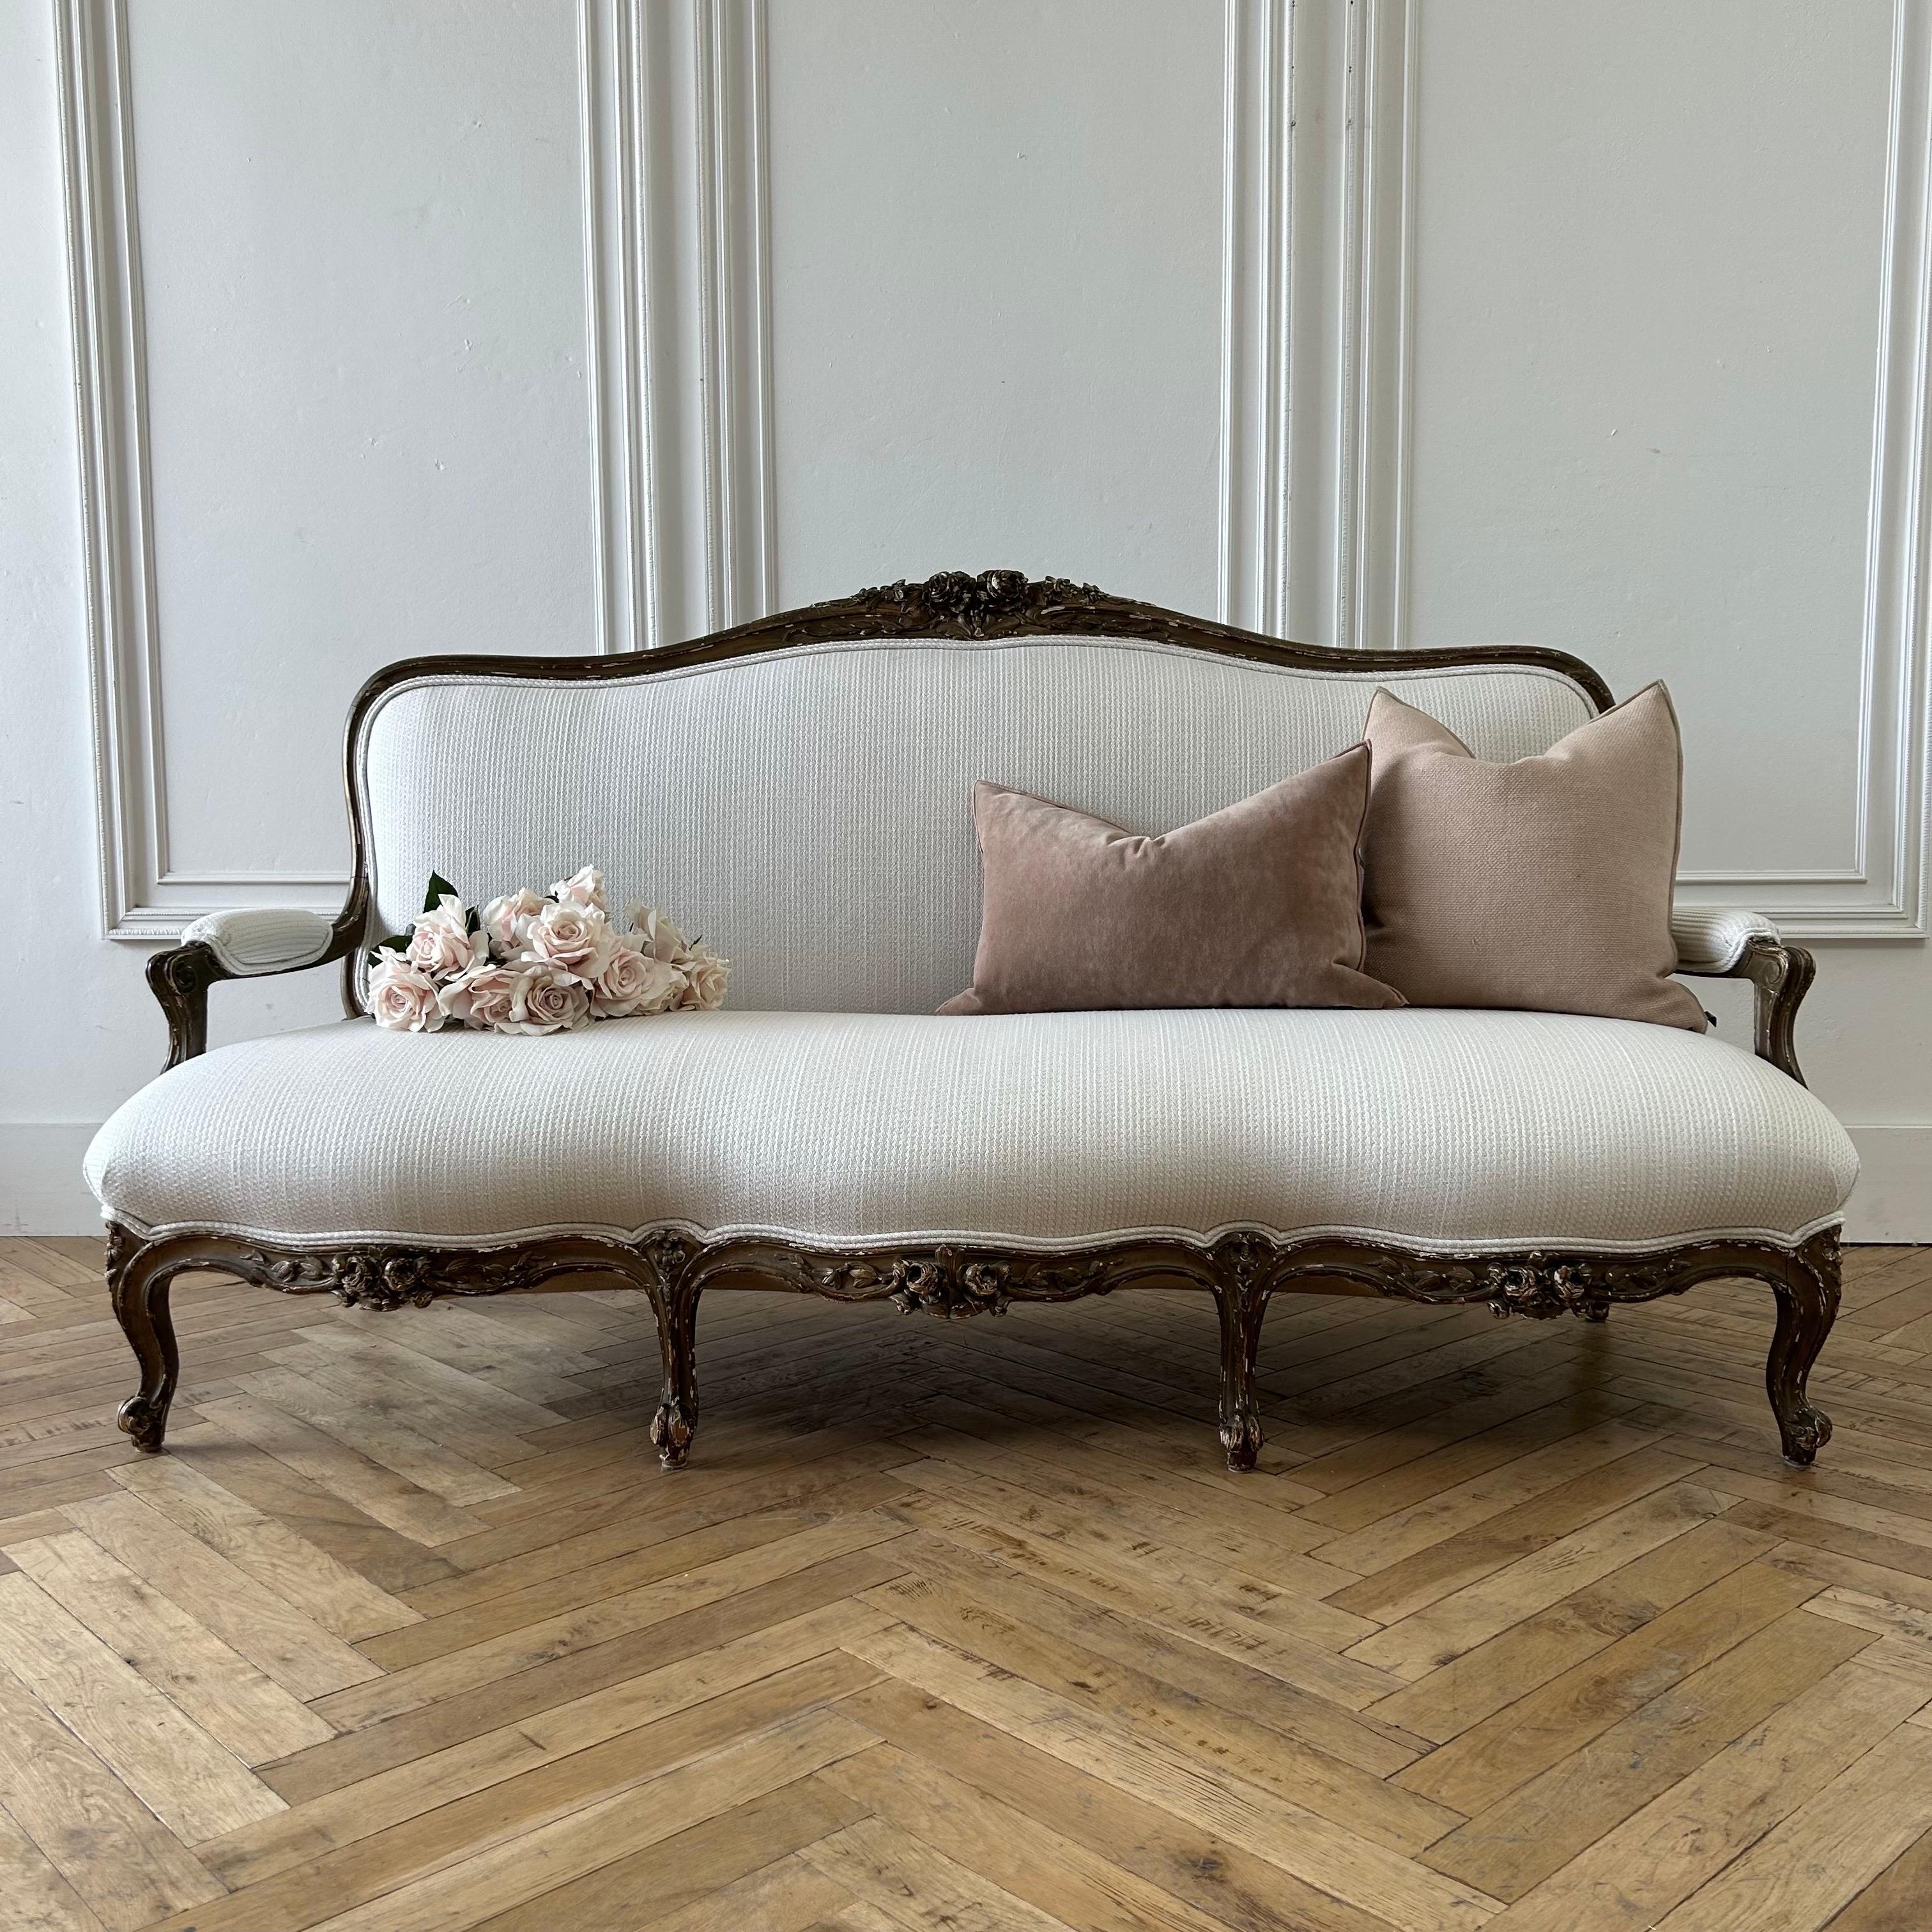 Antique French Gilt Wood Settee from France. Large Carved Roses and Louis XV Style legs, natural chipping, and fading on the original finish, adding a beautiful patina. 
Upholstered in a cashmere and wool Loro Piana Fabric in antique white, knitted